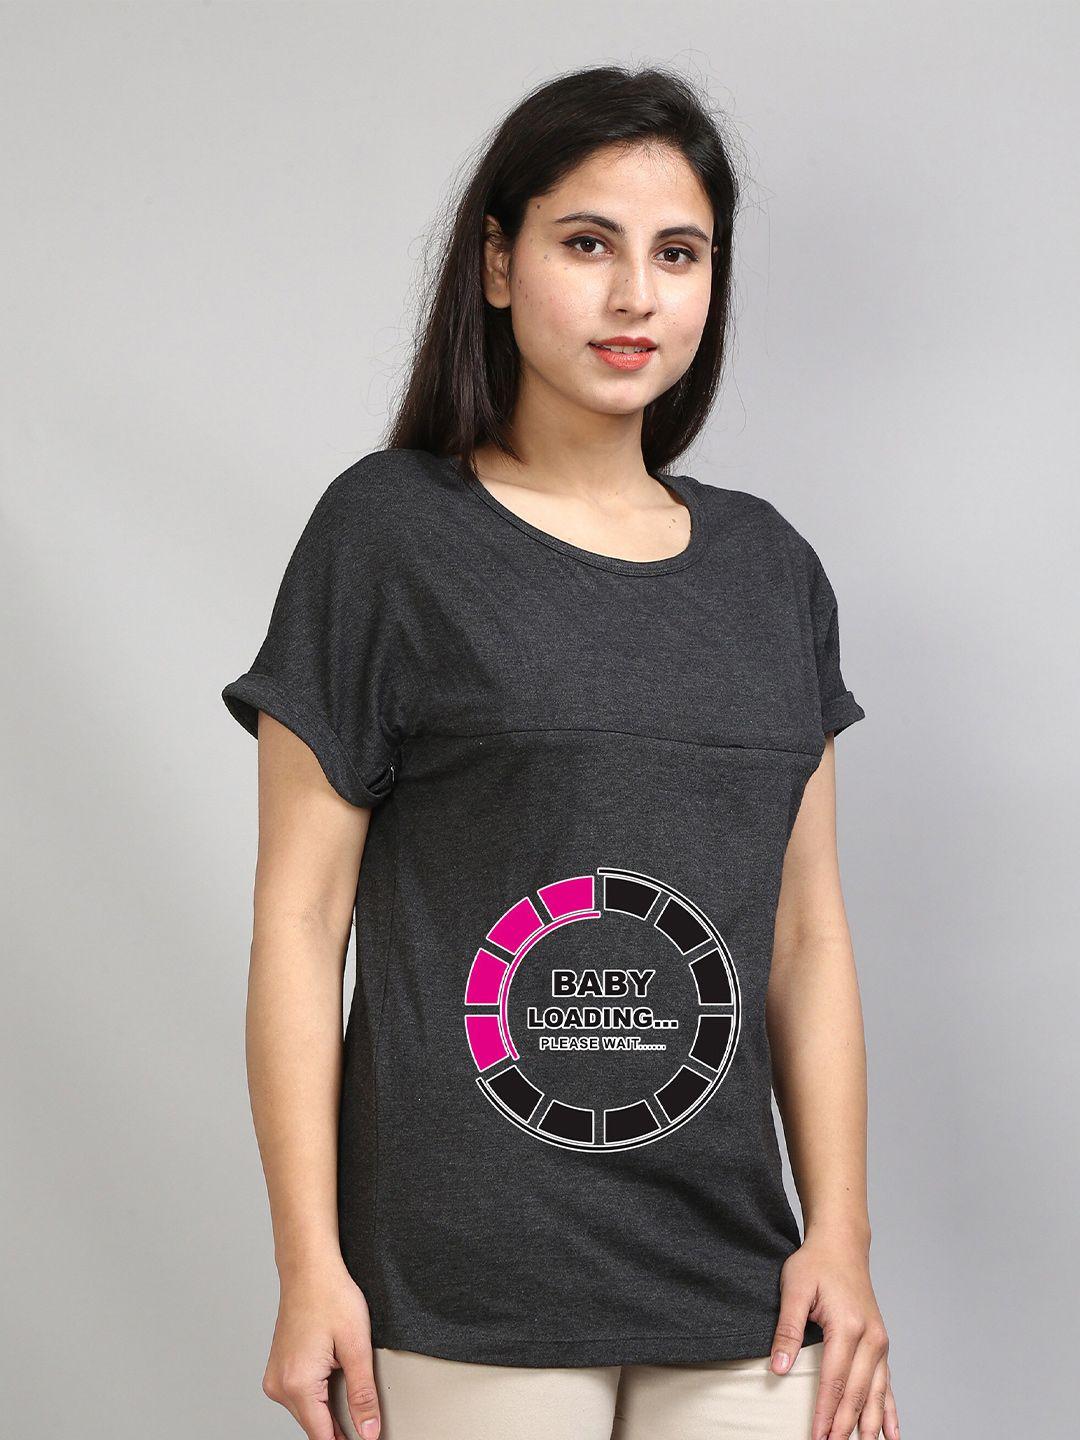 sillyboom graphic printed round neck cotton maternity t-shirt